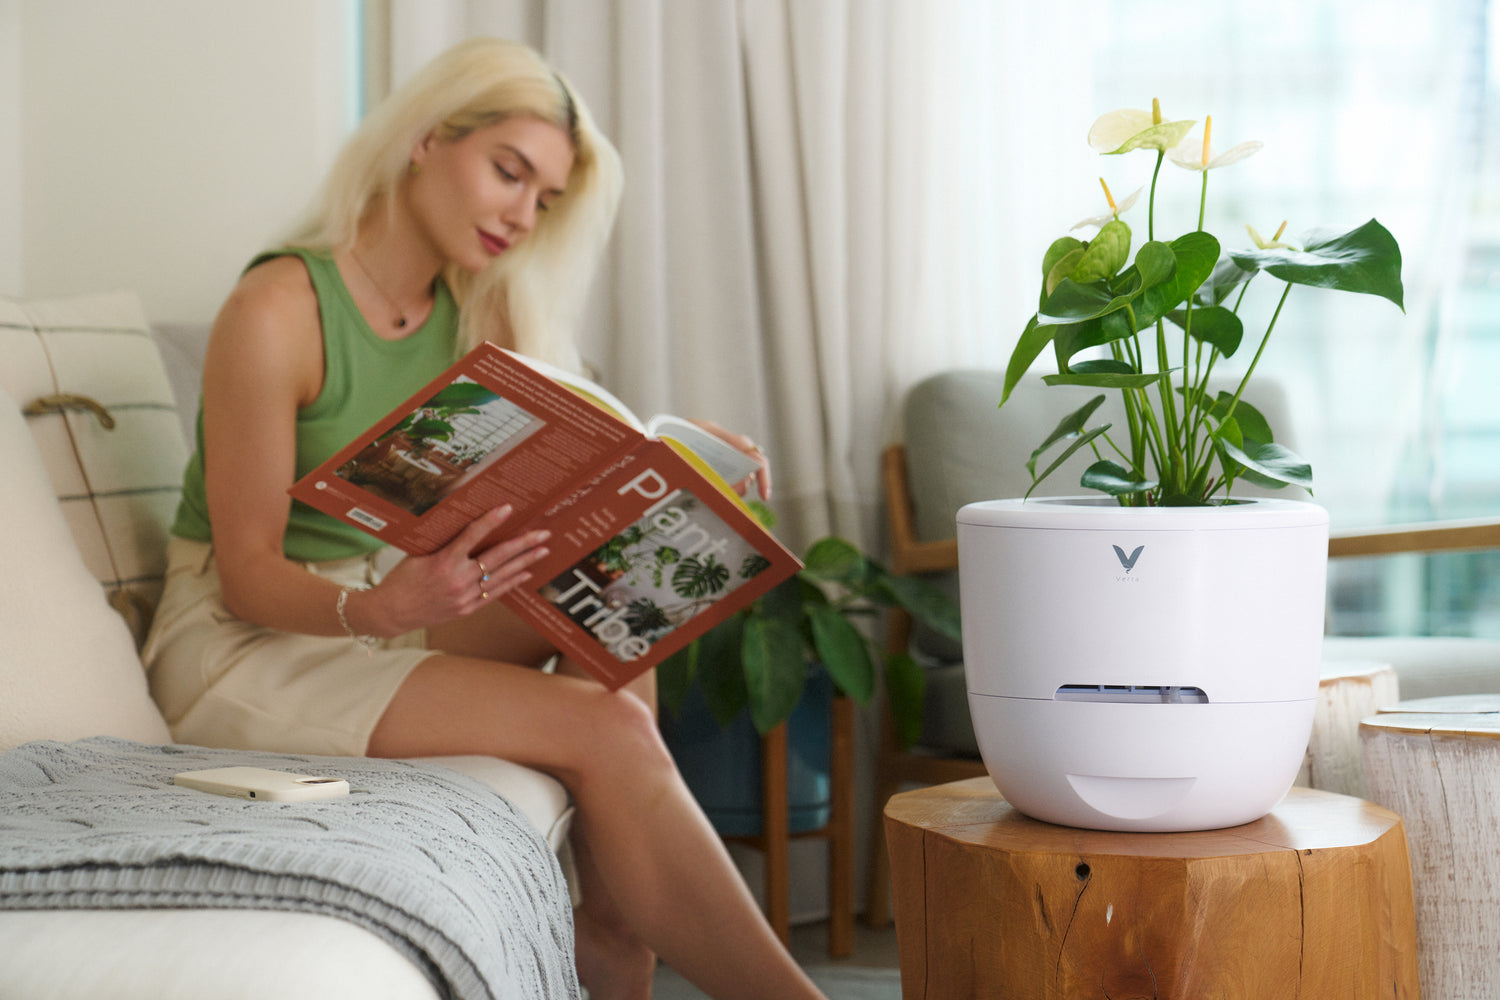 Woman reading on sofa, enjoying clean air beside Verta's Natural 4-in-1 Eco-Friendly Air Purifier utilizing plants as filters.